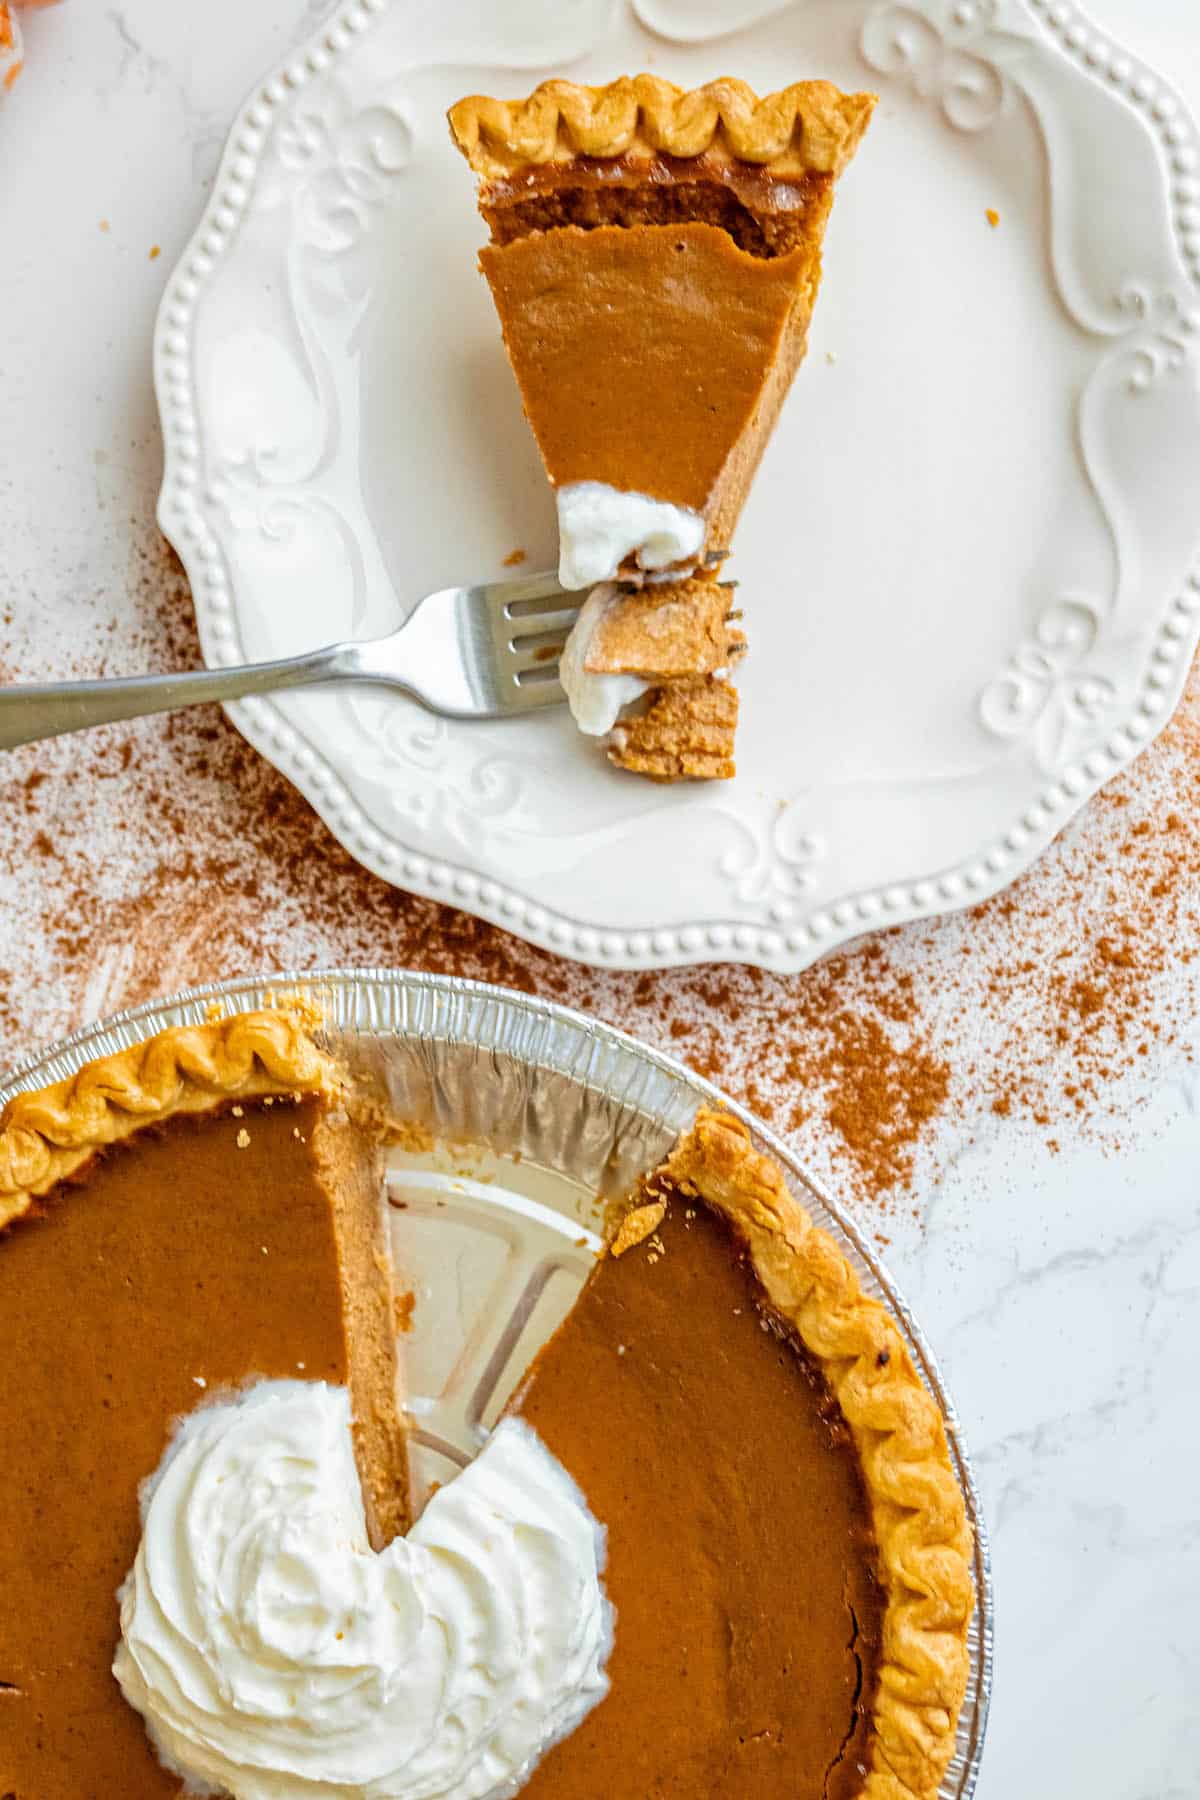 A slice of spicy bourbon pumpkin pie with whipped cream and a fork.